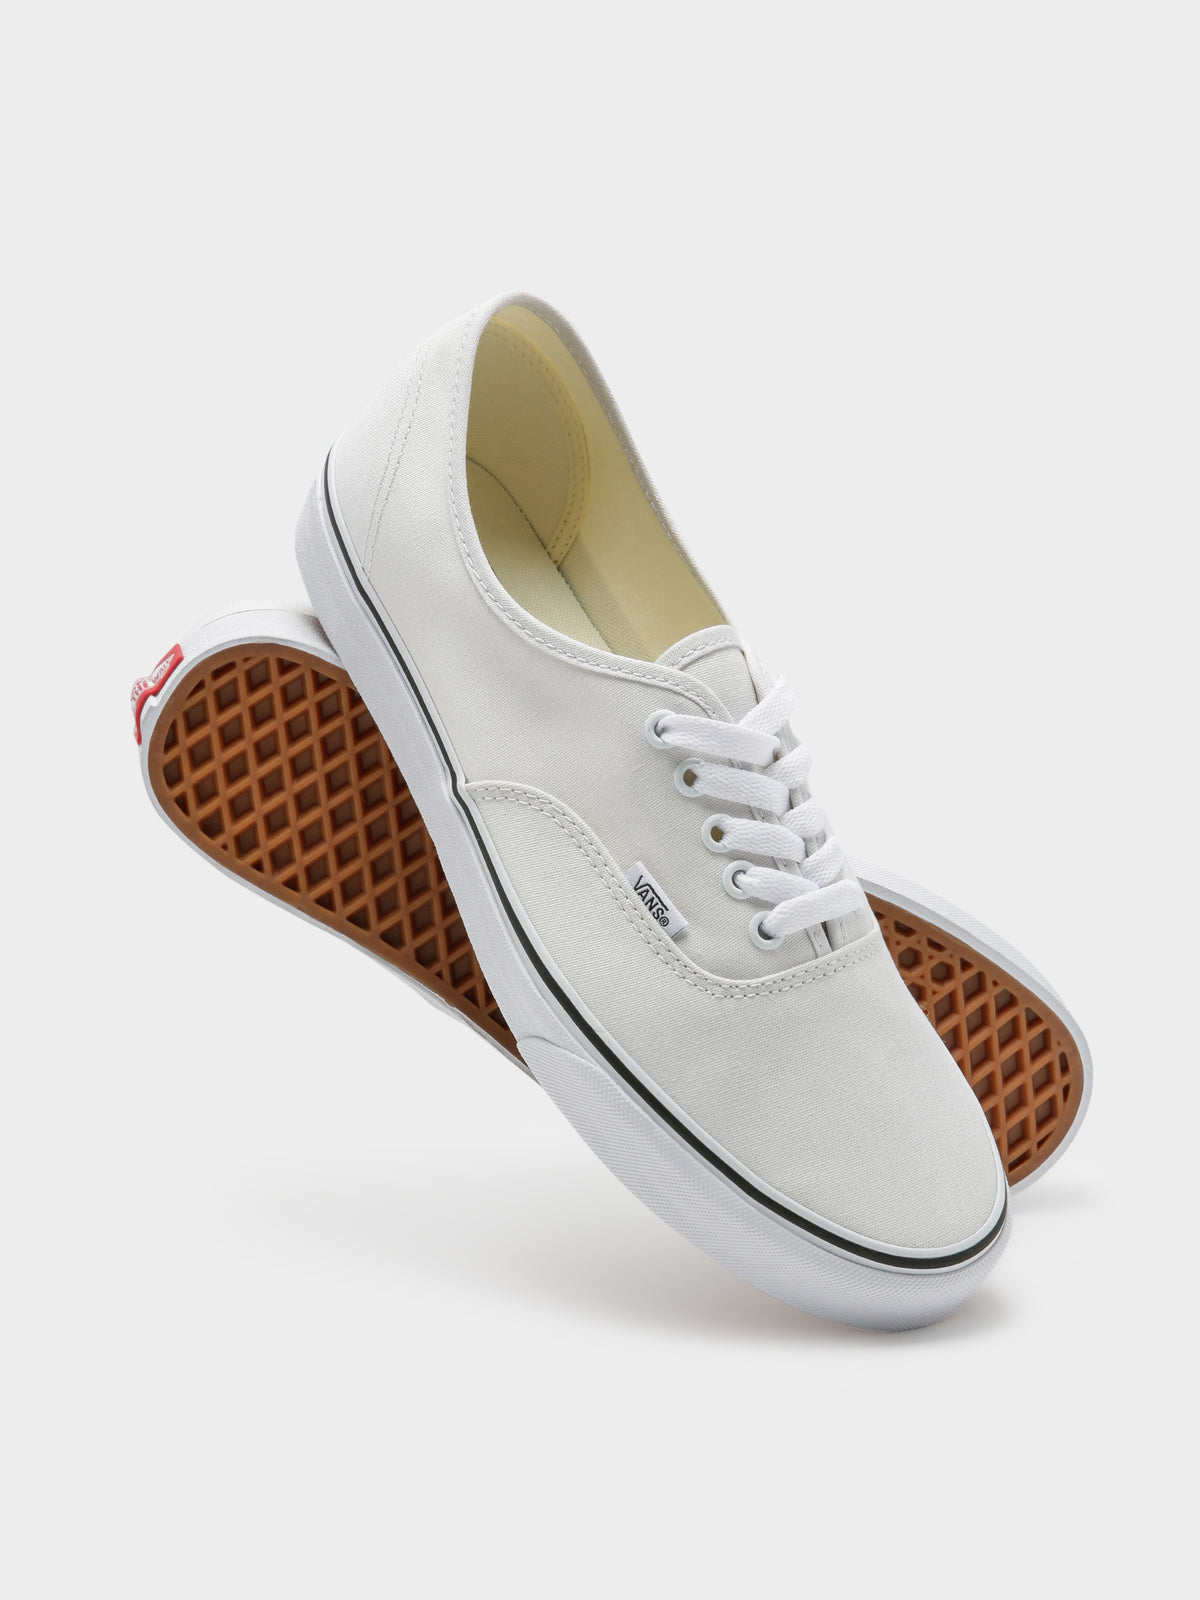 Unisex Authentic Color Theory Sneakers in Cream